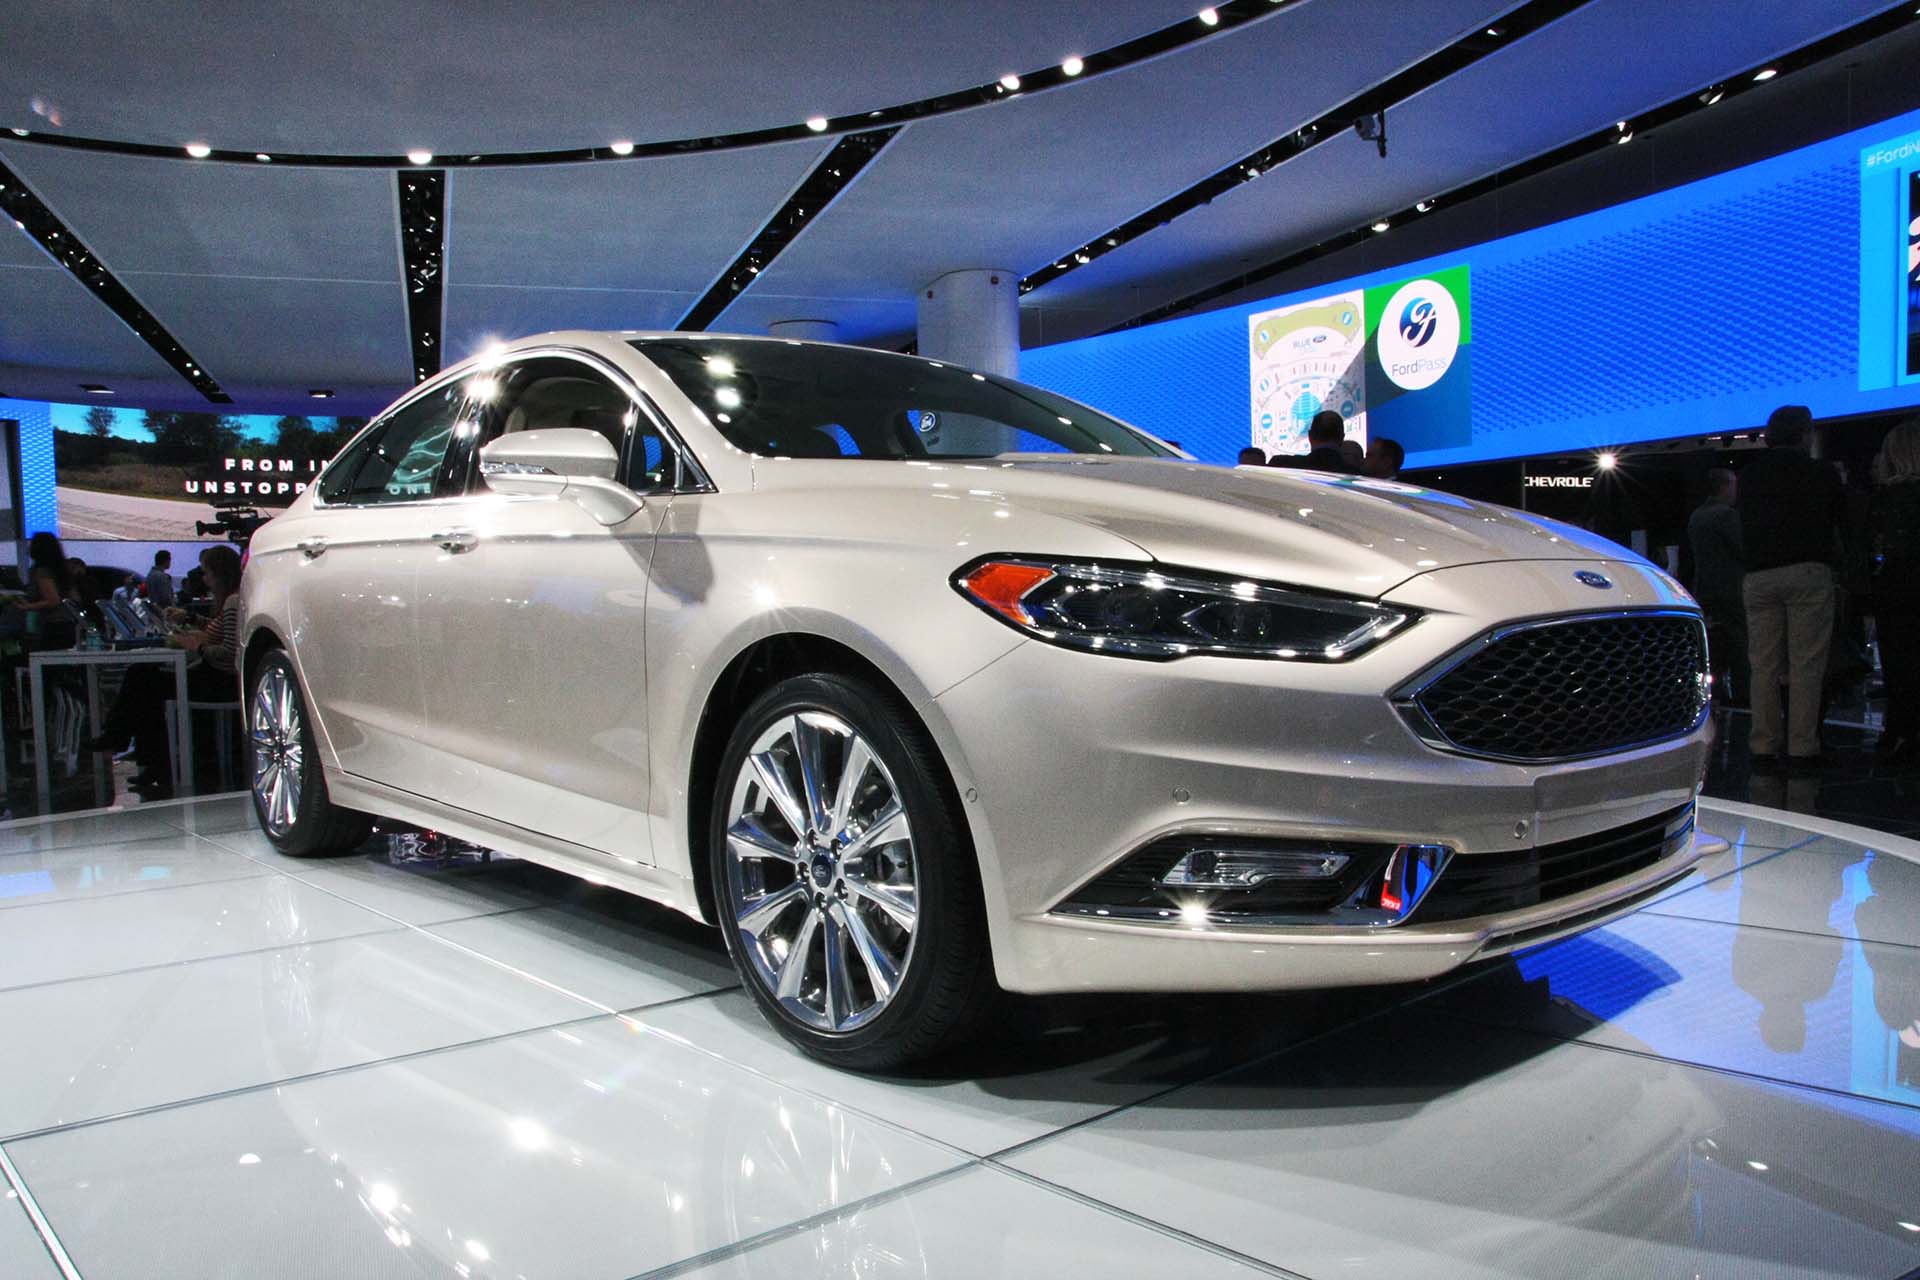 If you're looking for confidence and a hybrid powertrain, however, you'll find a worthy contender on our own shores with the 2017 Ford Fusion. Buyers will have their pick of four-cylinder and V6 EcoBoost engines, with Hybrid and Energi versions also available.